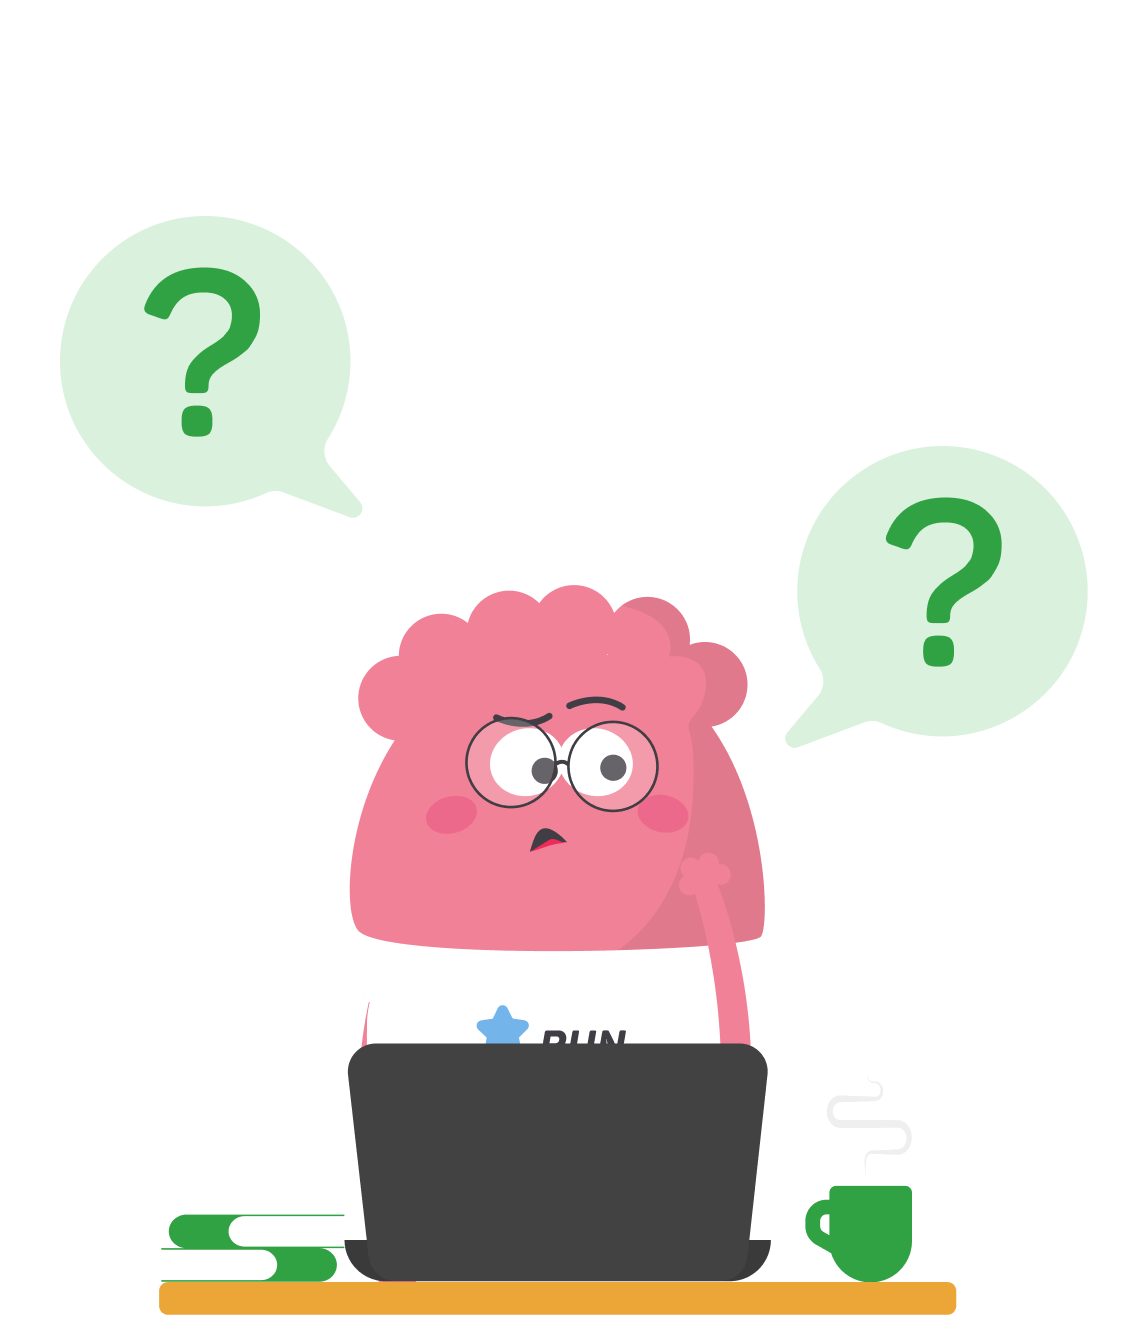 The image shows the RUNDAY character sitting at a computer and thinking about questions